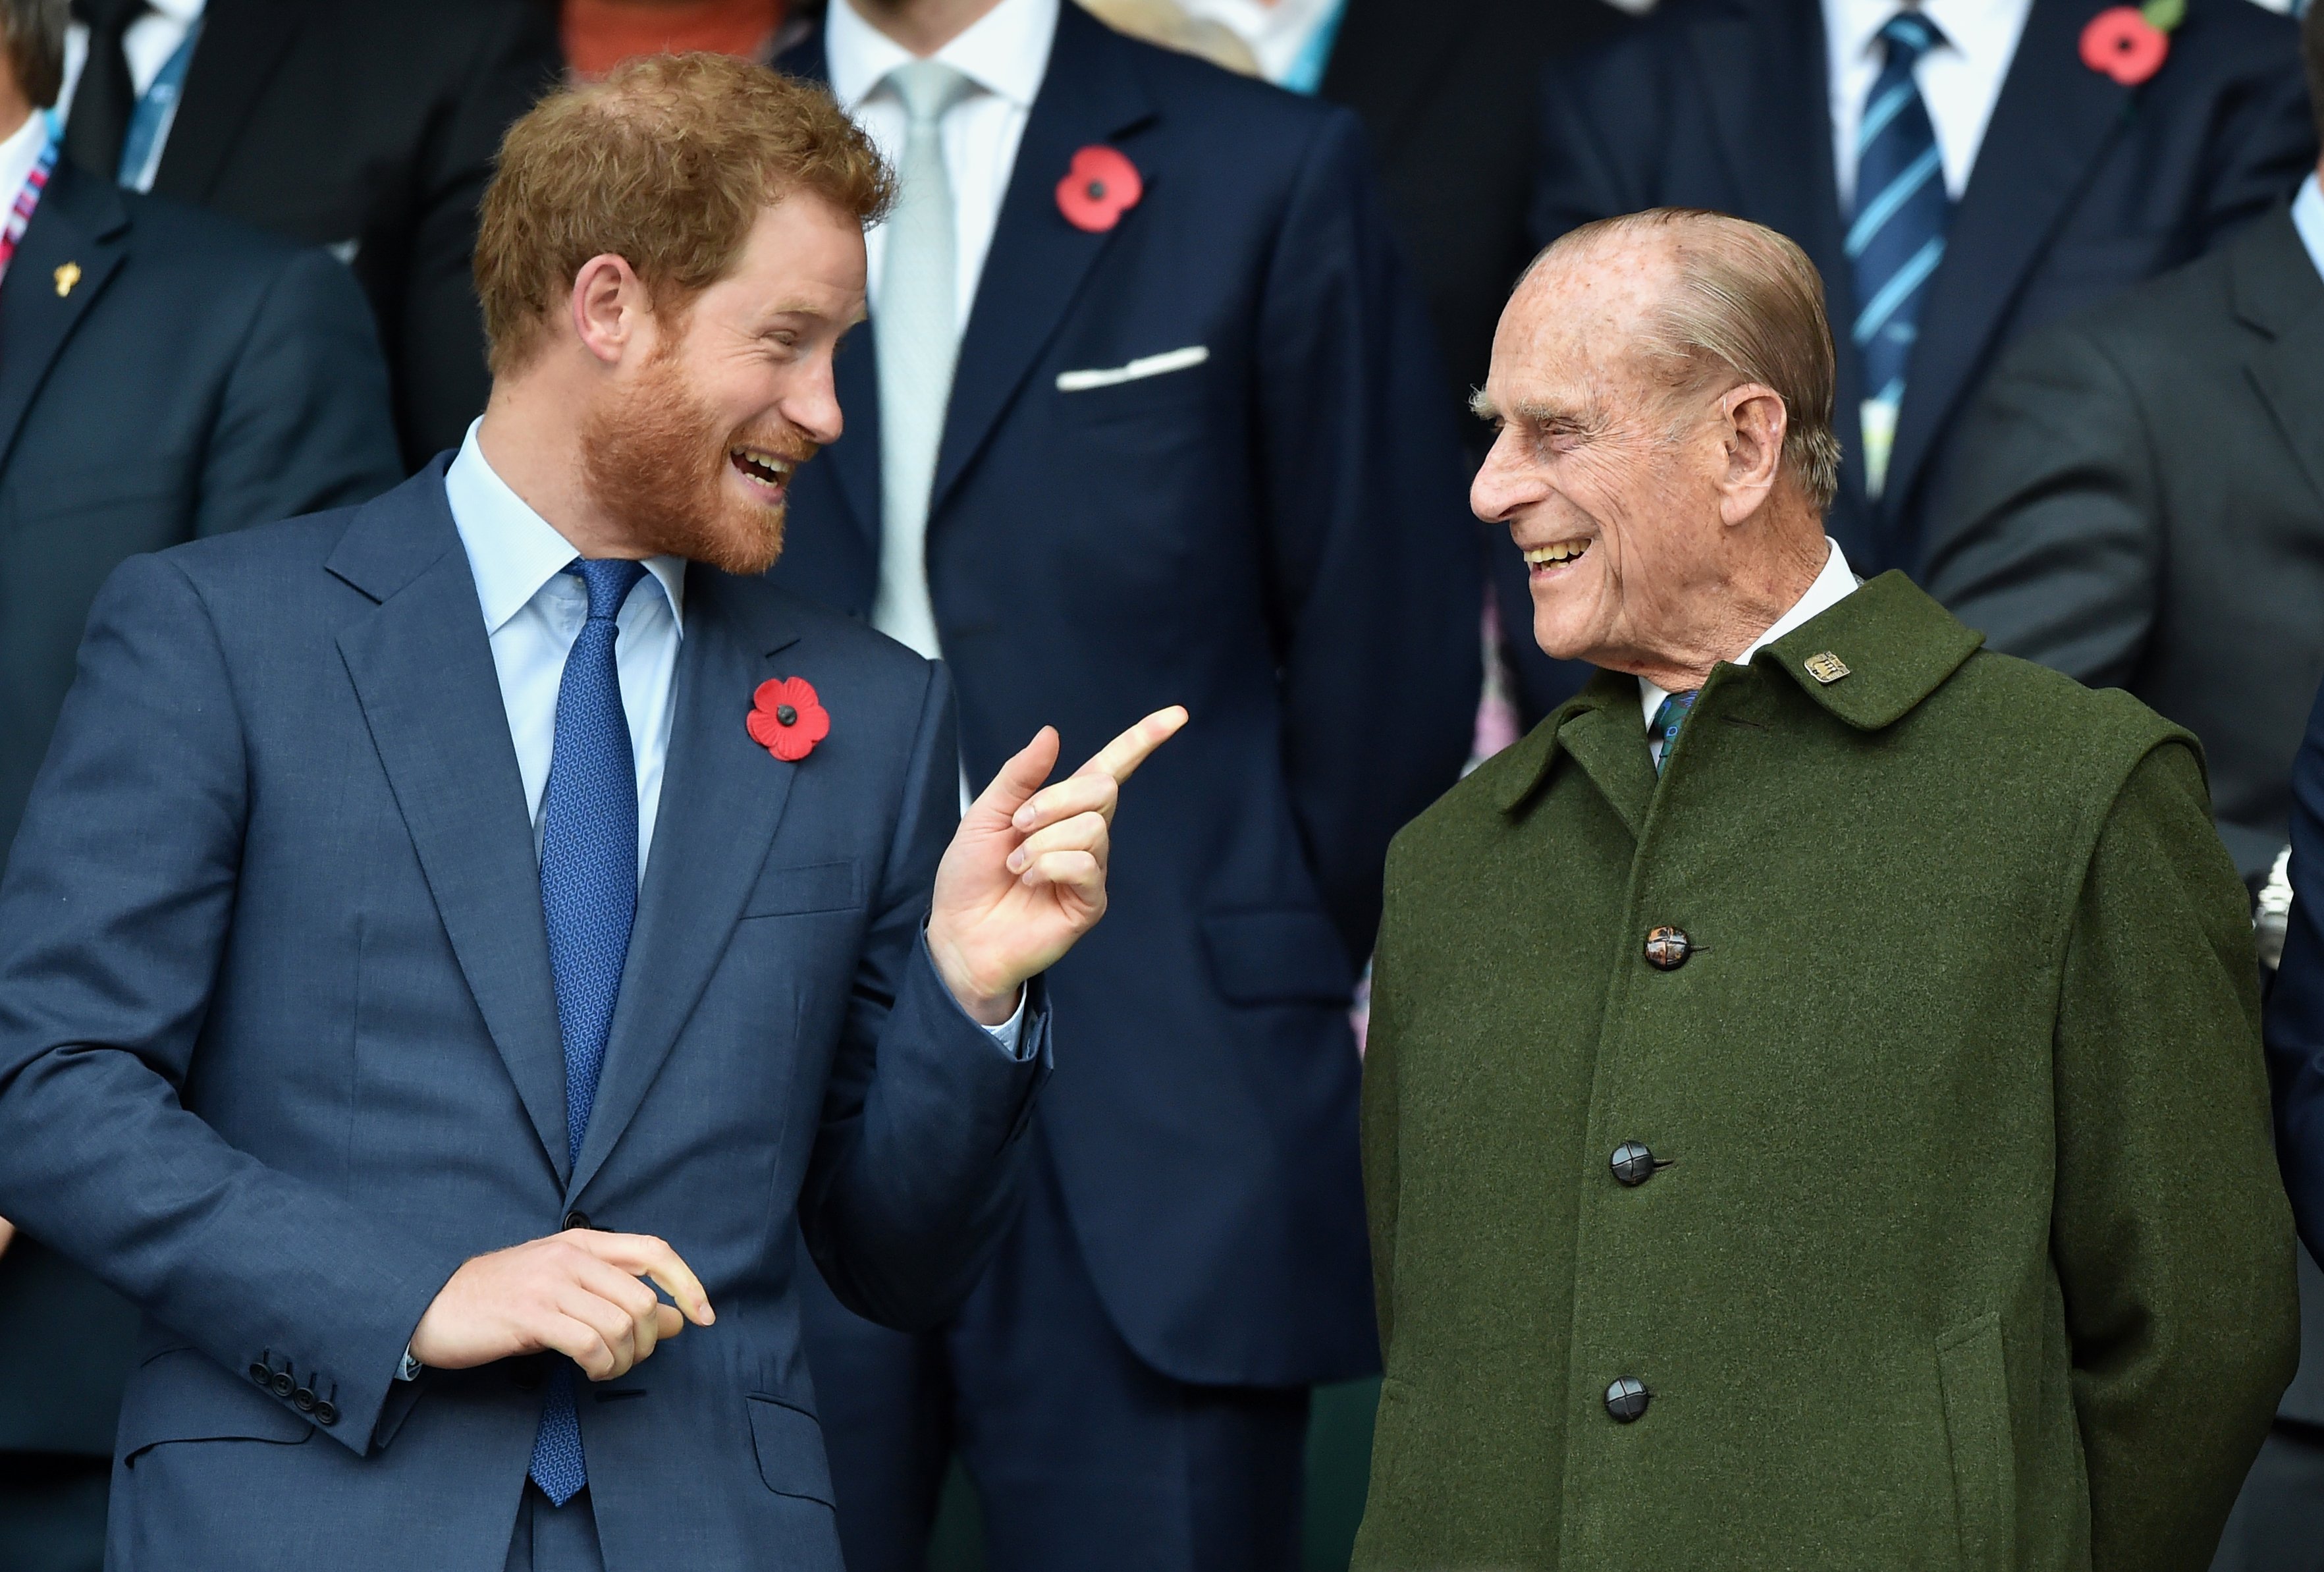 Prince Harry and Prince Philip, Duke of Edinburgh attend the 2015 Rugby World Cup Final match between New Zealand and Australia at Twickenham Stadium on October 31, 2015 in London, England | Source: Getty Images